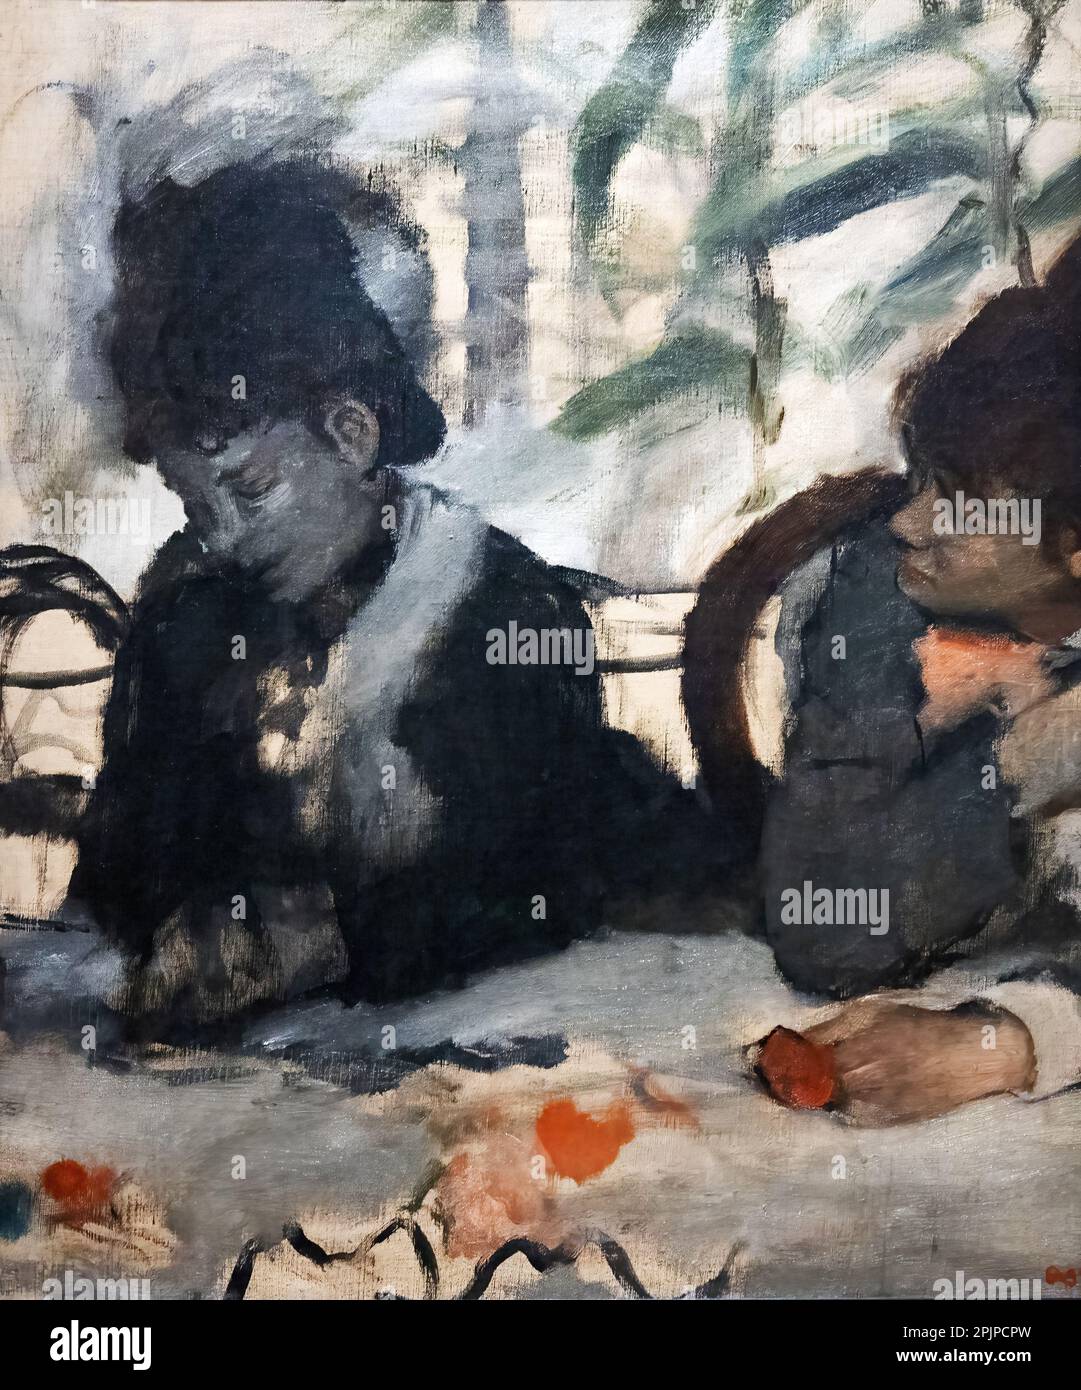 Edgar Degas painting - At the Cafe, c. 1876; women in a cafe, 19th century impressionist painting; French impressionists, 1800s. Stock Photo